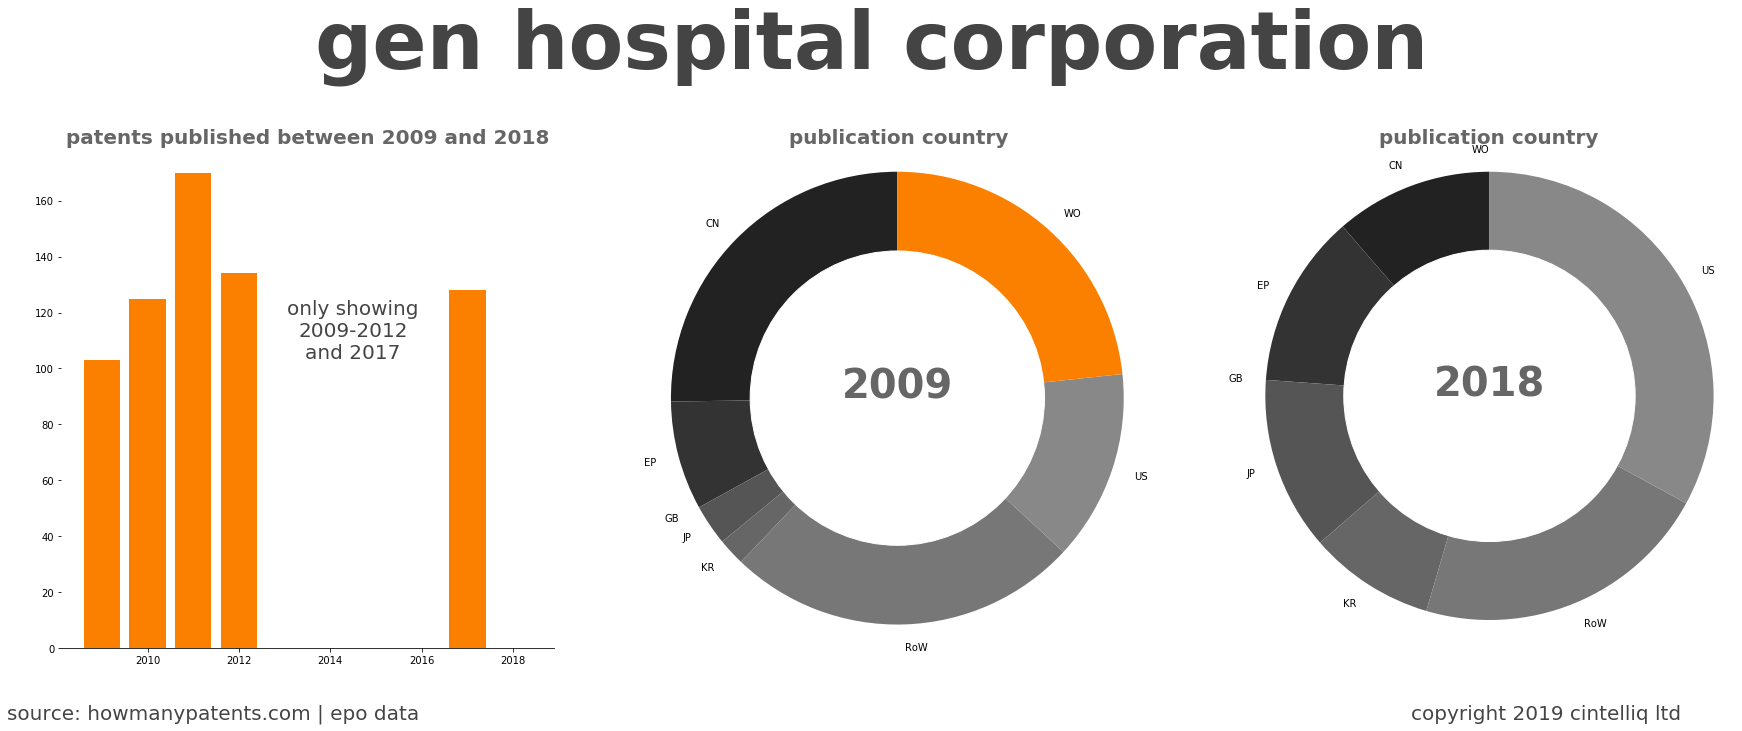 summary of patents for Gen Hospital Corporation